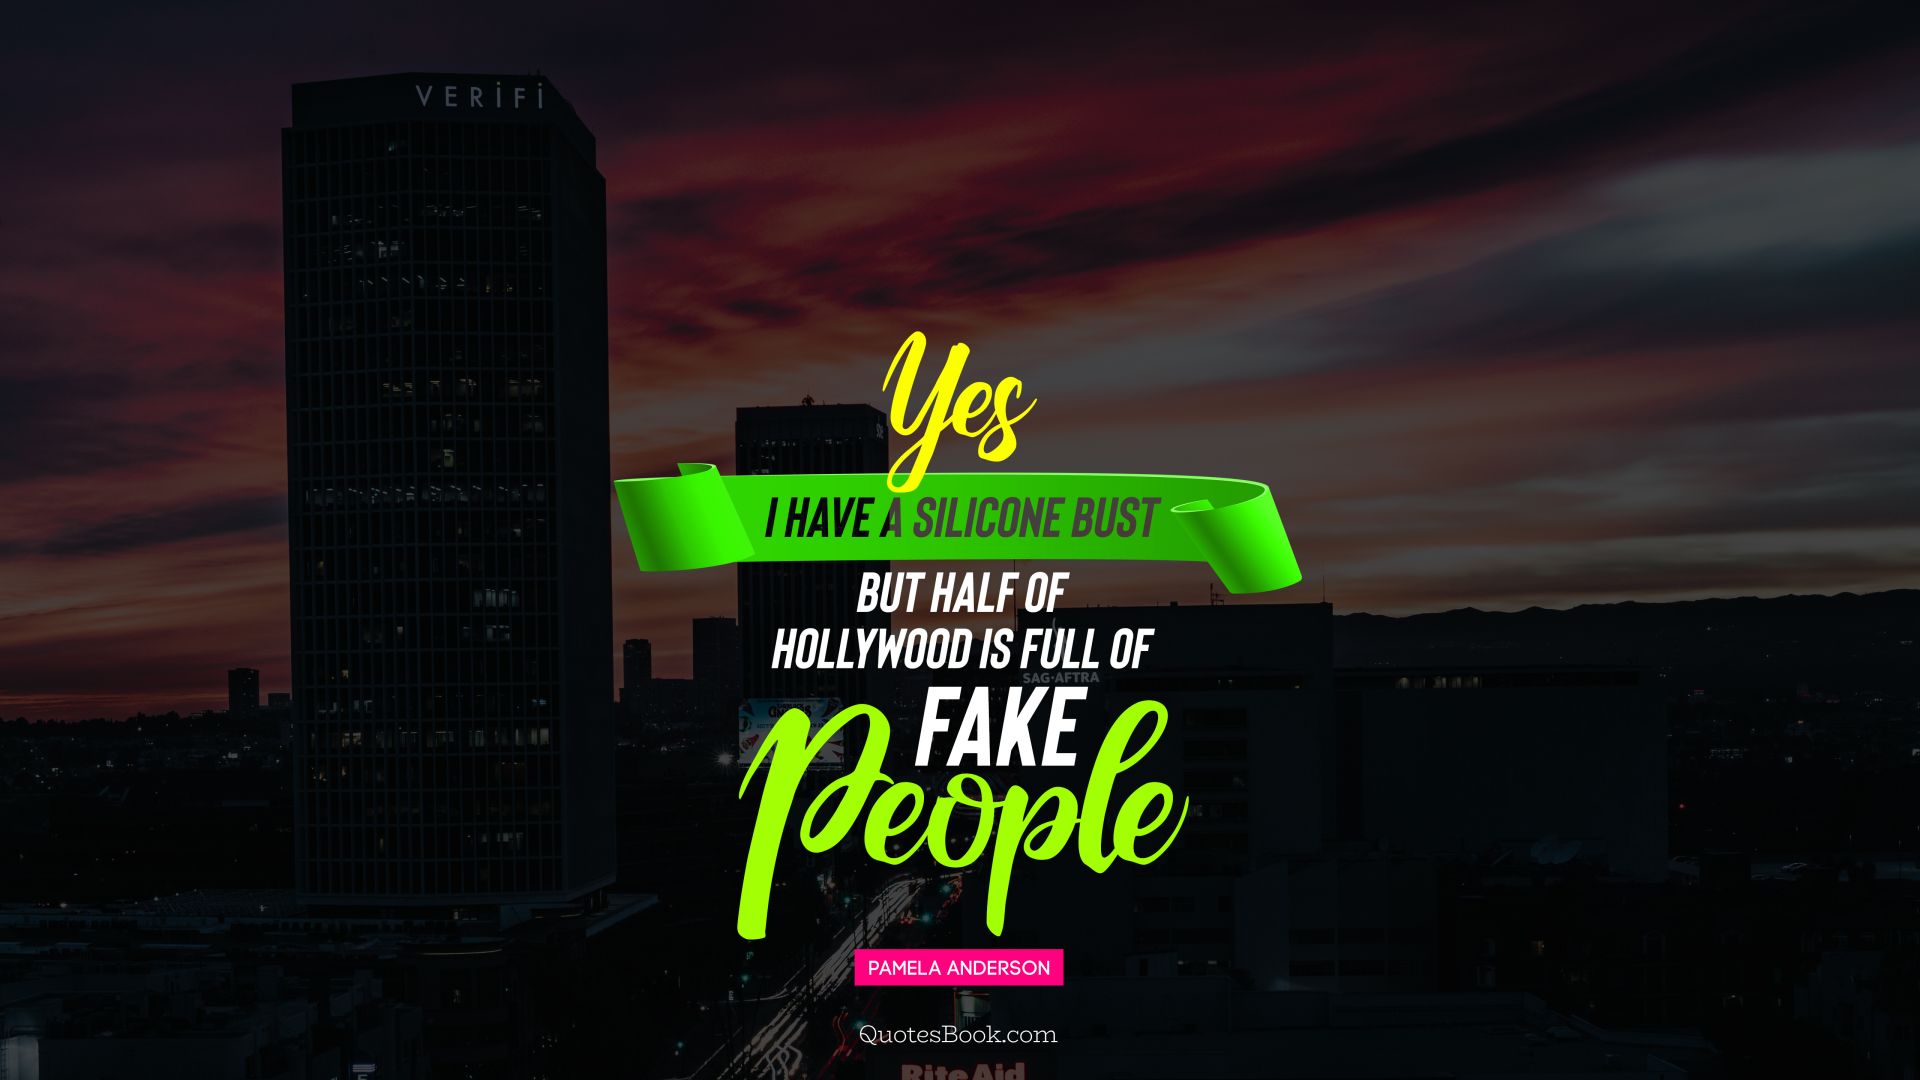 Yes I have a silicone bust but half of Hollywood is full of fake people. - Quote by Pamela Anderson